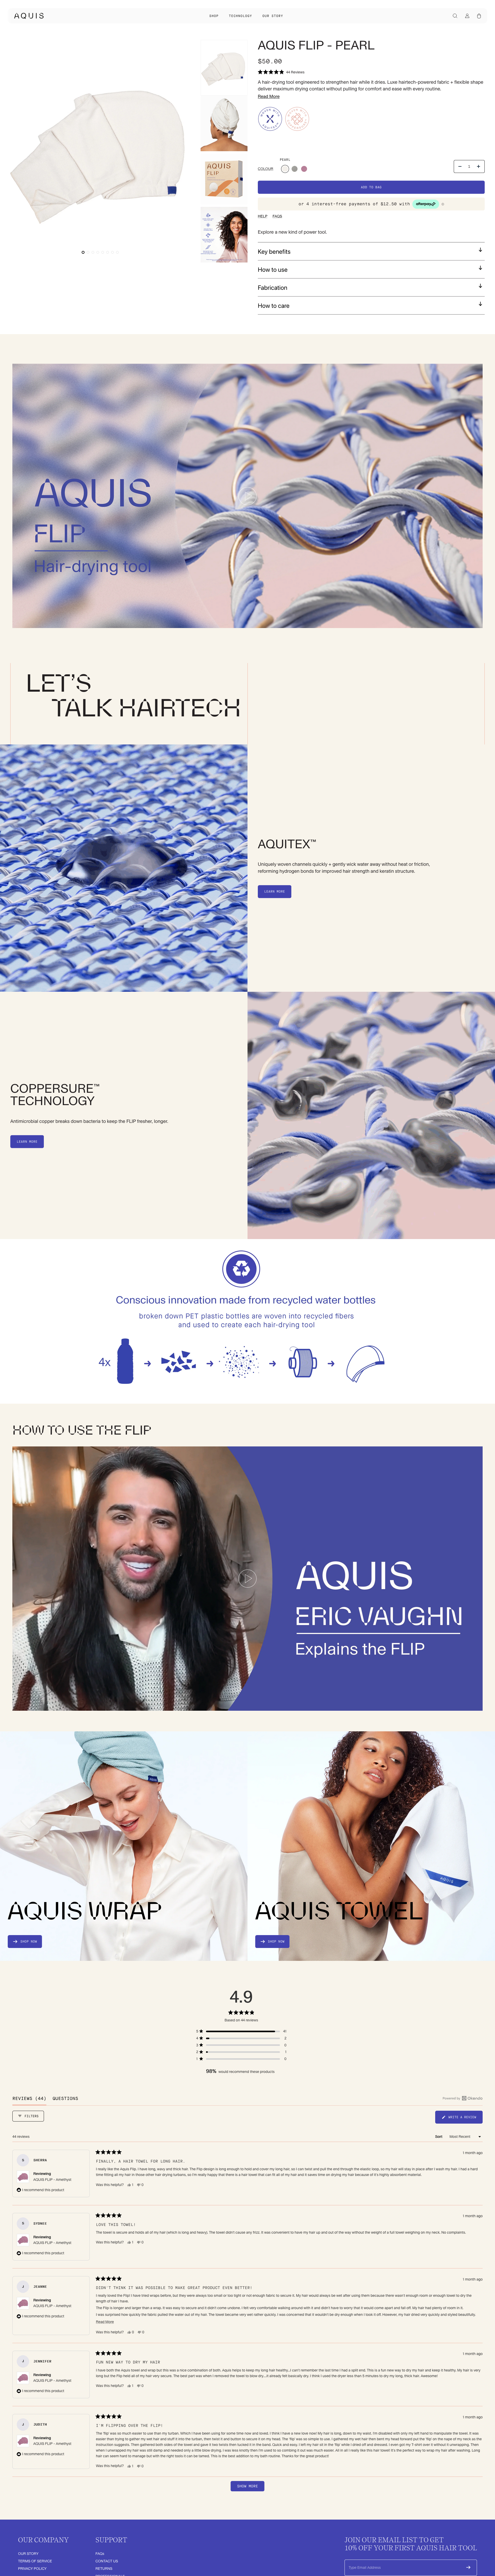 AQUIS Landing Page Example: At AQUIS, we use science to simplify your hair care routine. Our products cut drying time by 50%, protect hair from frizz and prime it for effortless styling.